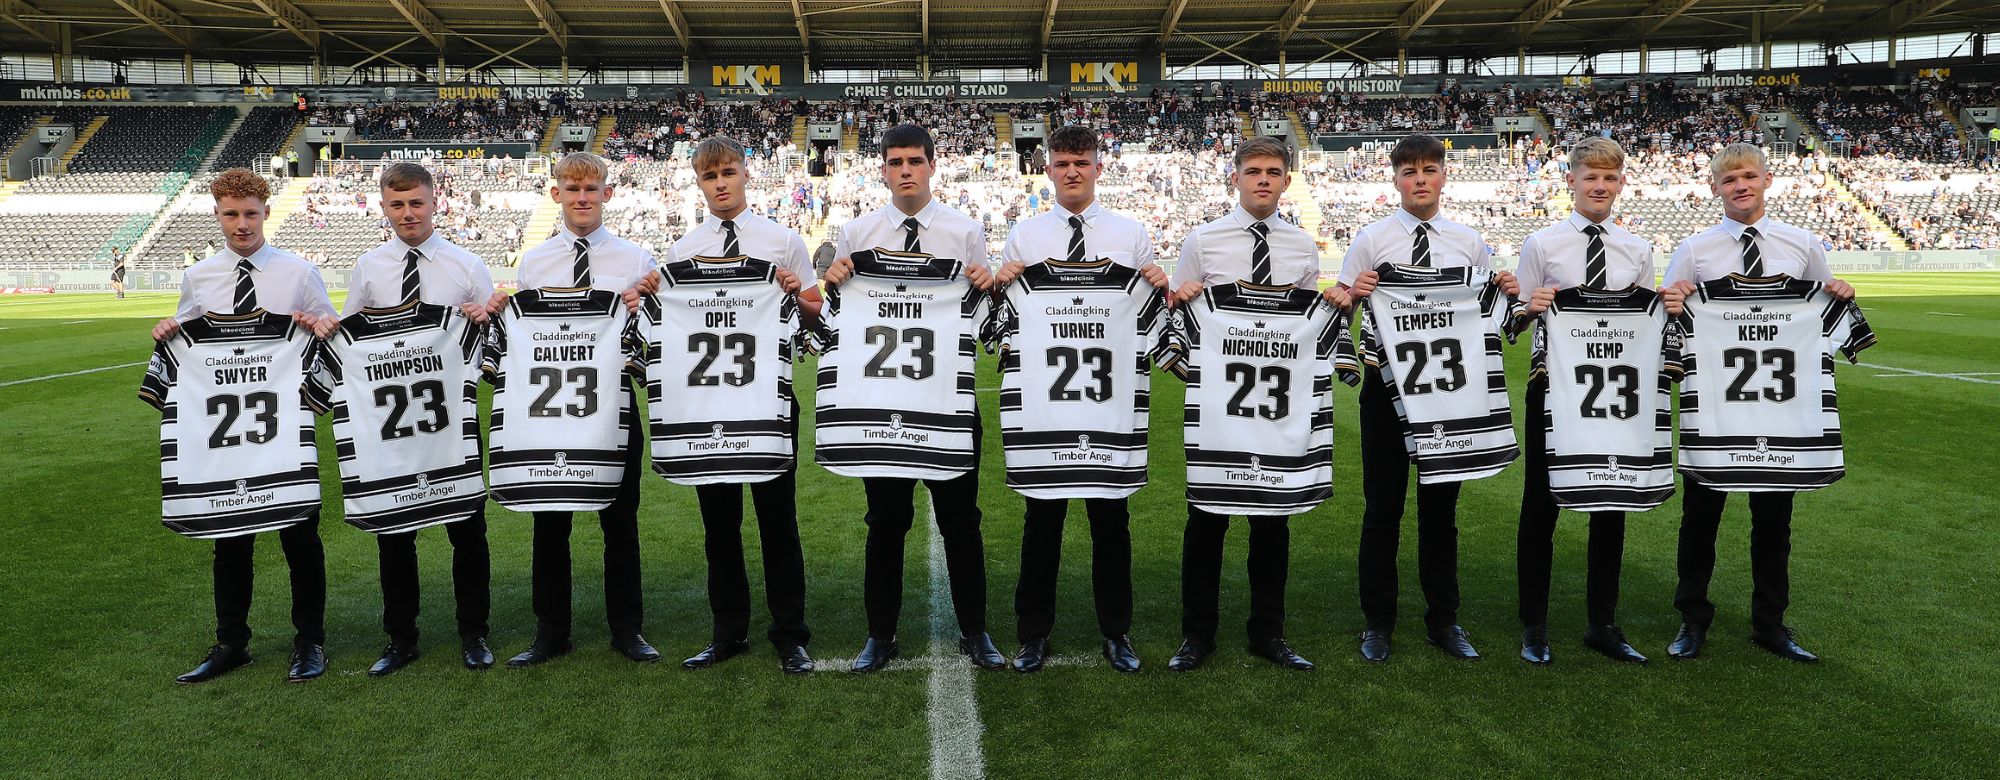 Ten Youngsters Progress To Academy From Scholarship